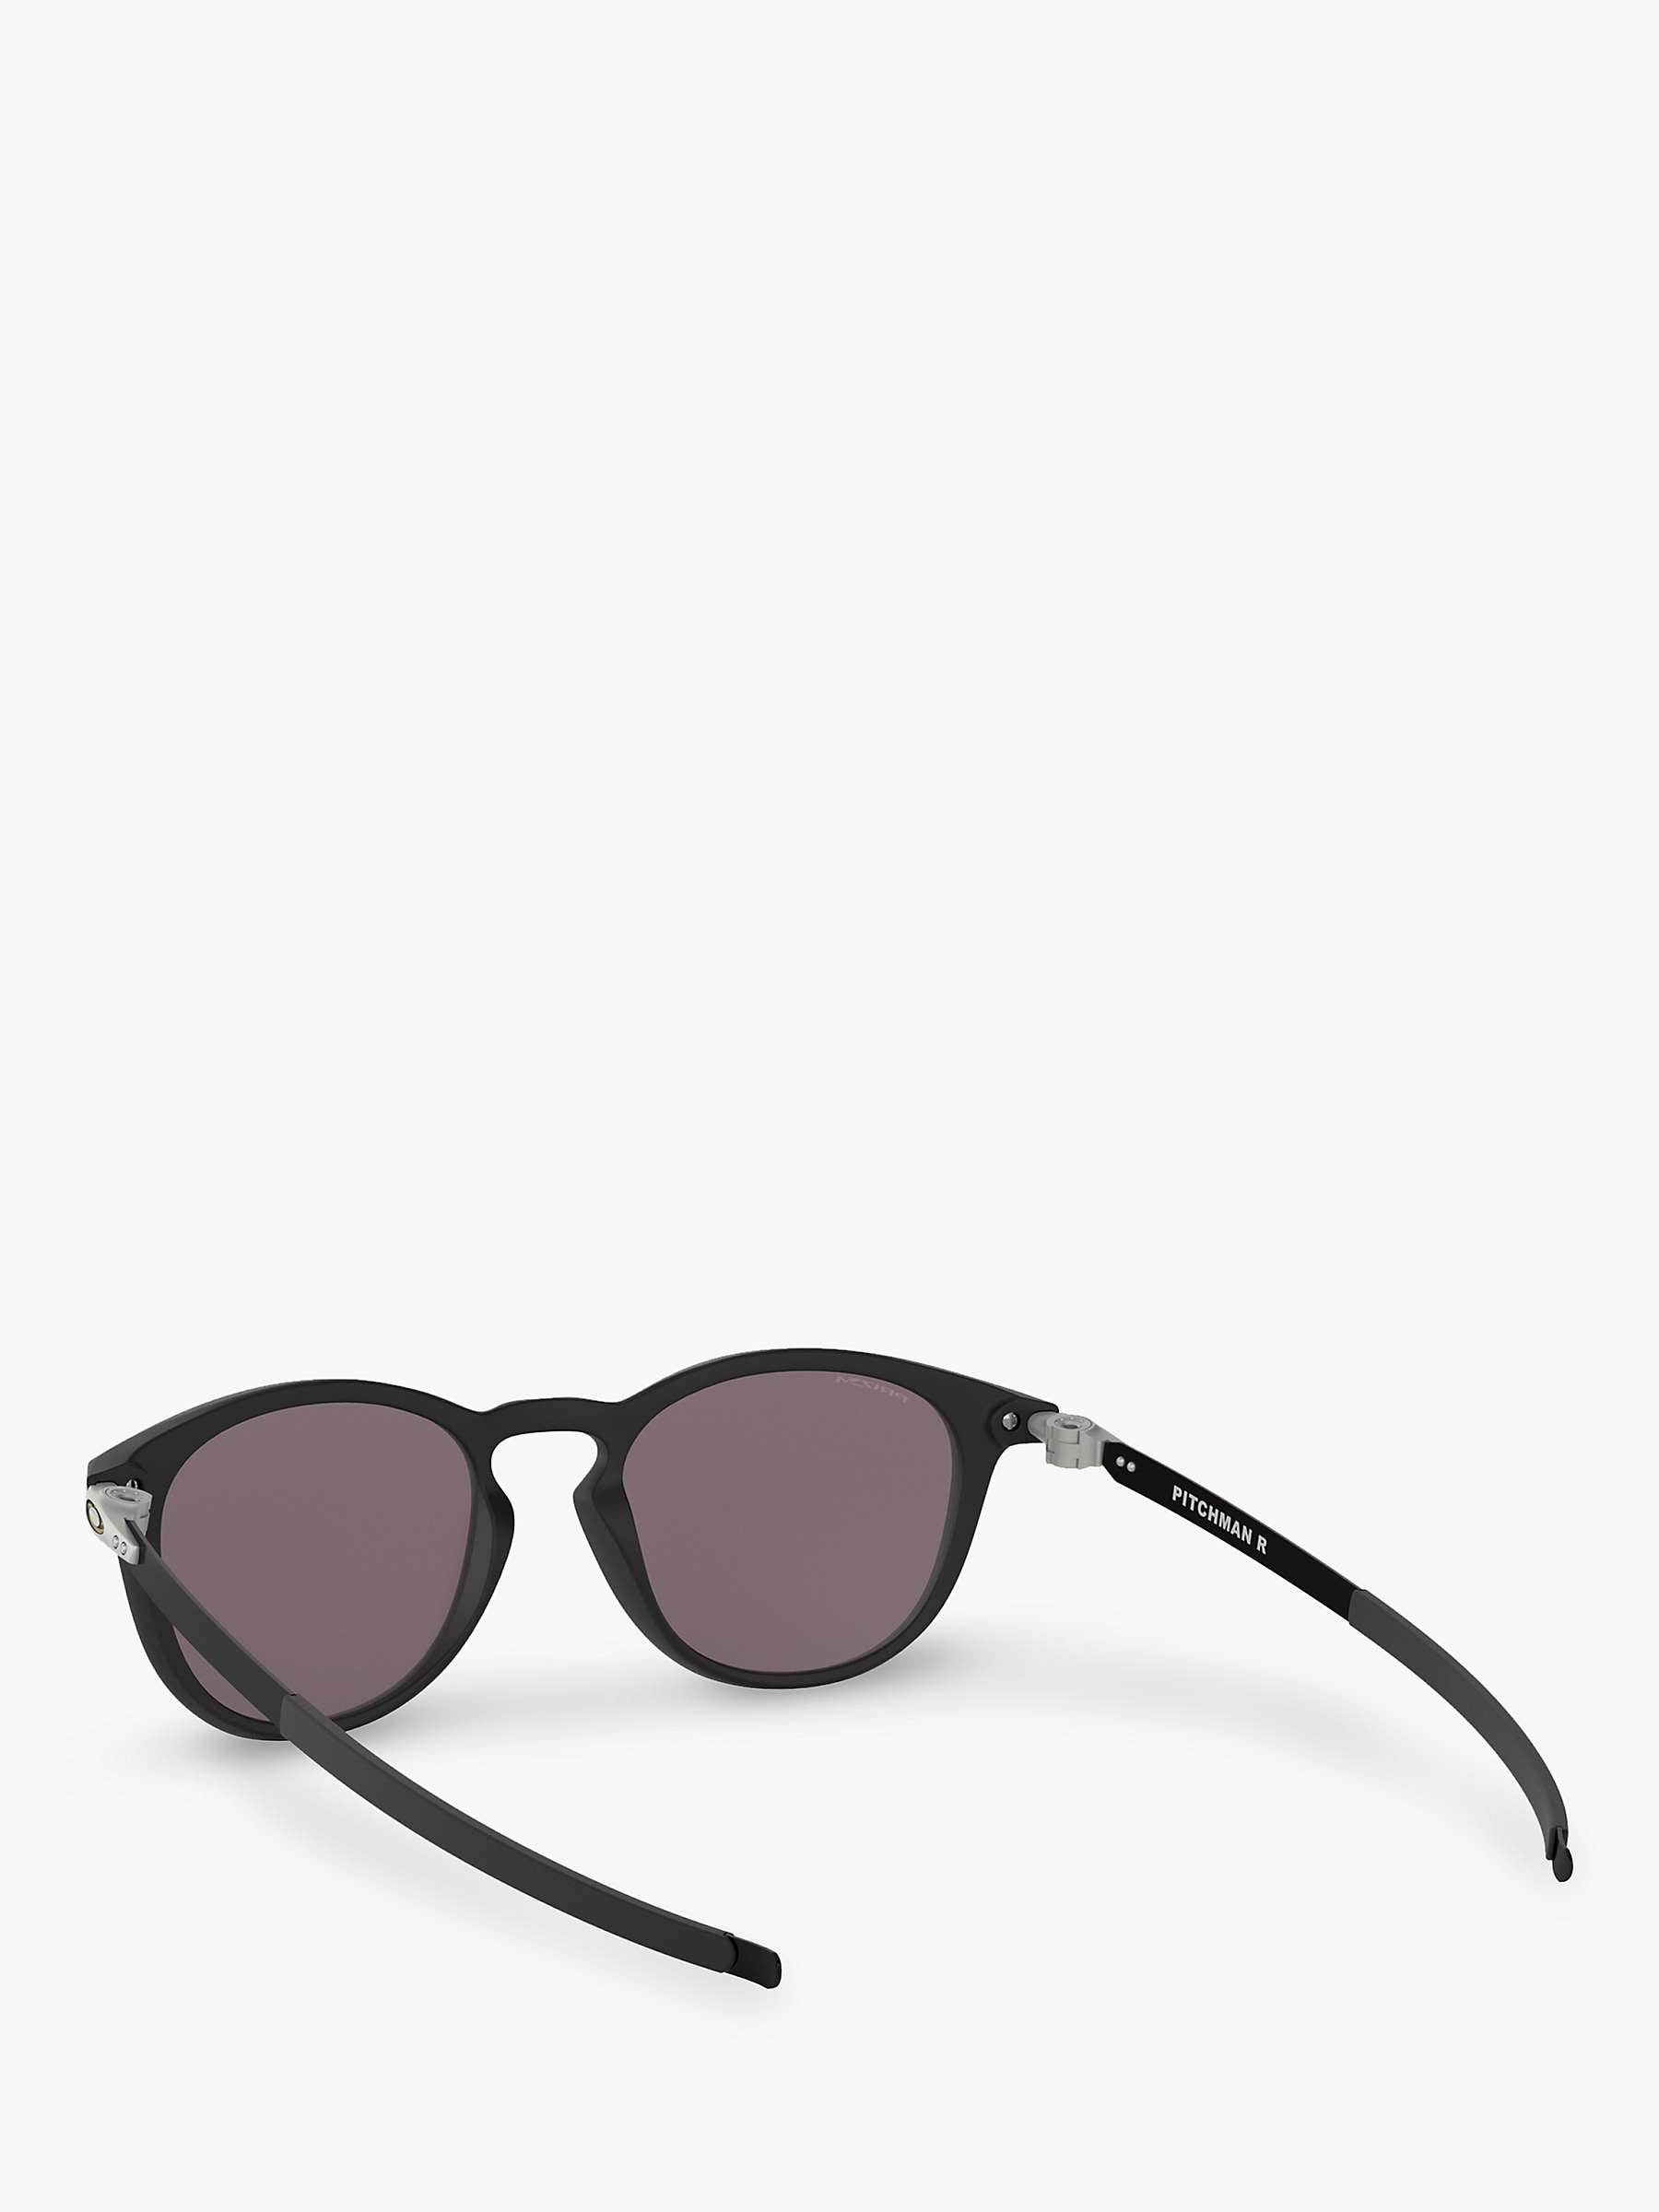 Buy Oakley OO9439 Men's Pitchman R Prizm Round Sunglasses Online at johnlewis.com